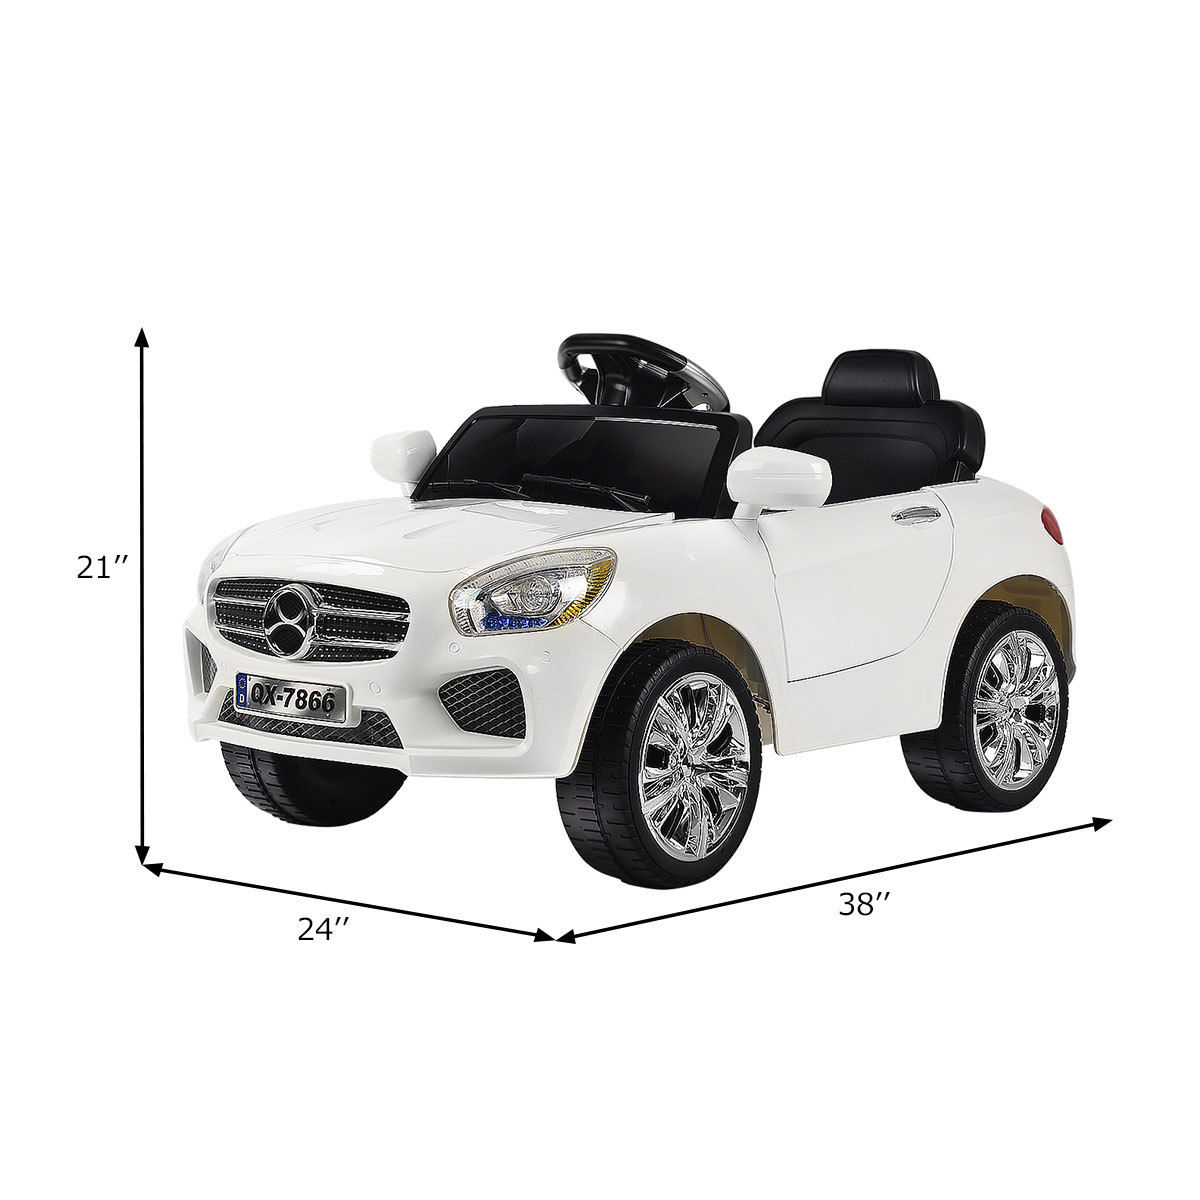 Details about   KIDS RIDE ON CAR LICENSED 3 SPEED 6V ELECTRIC CHILDRENS REMOTE CONTROL TOY